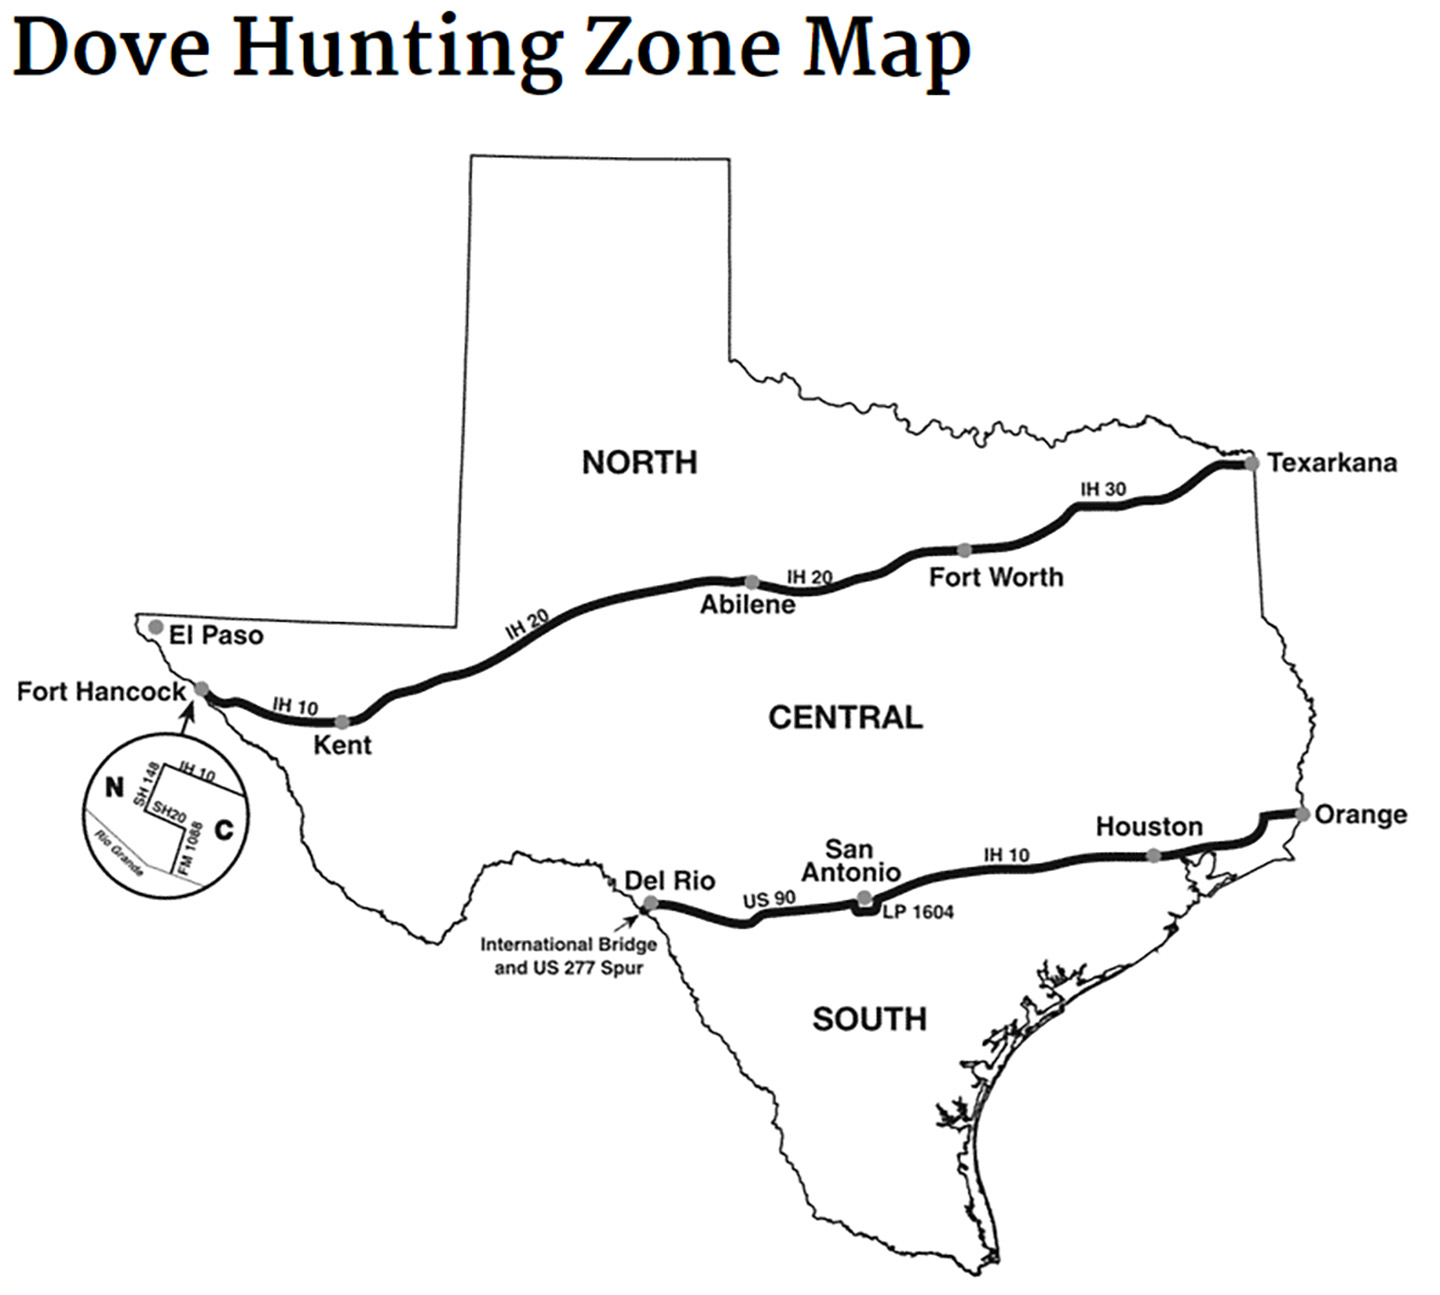 Dove hunting zone map